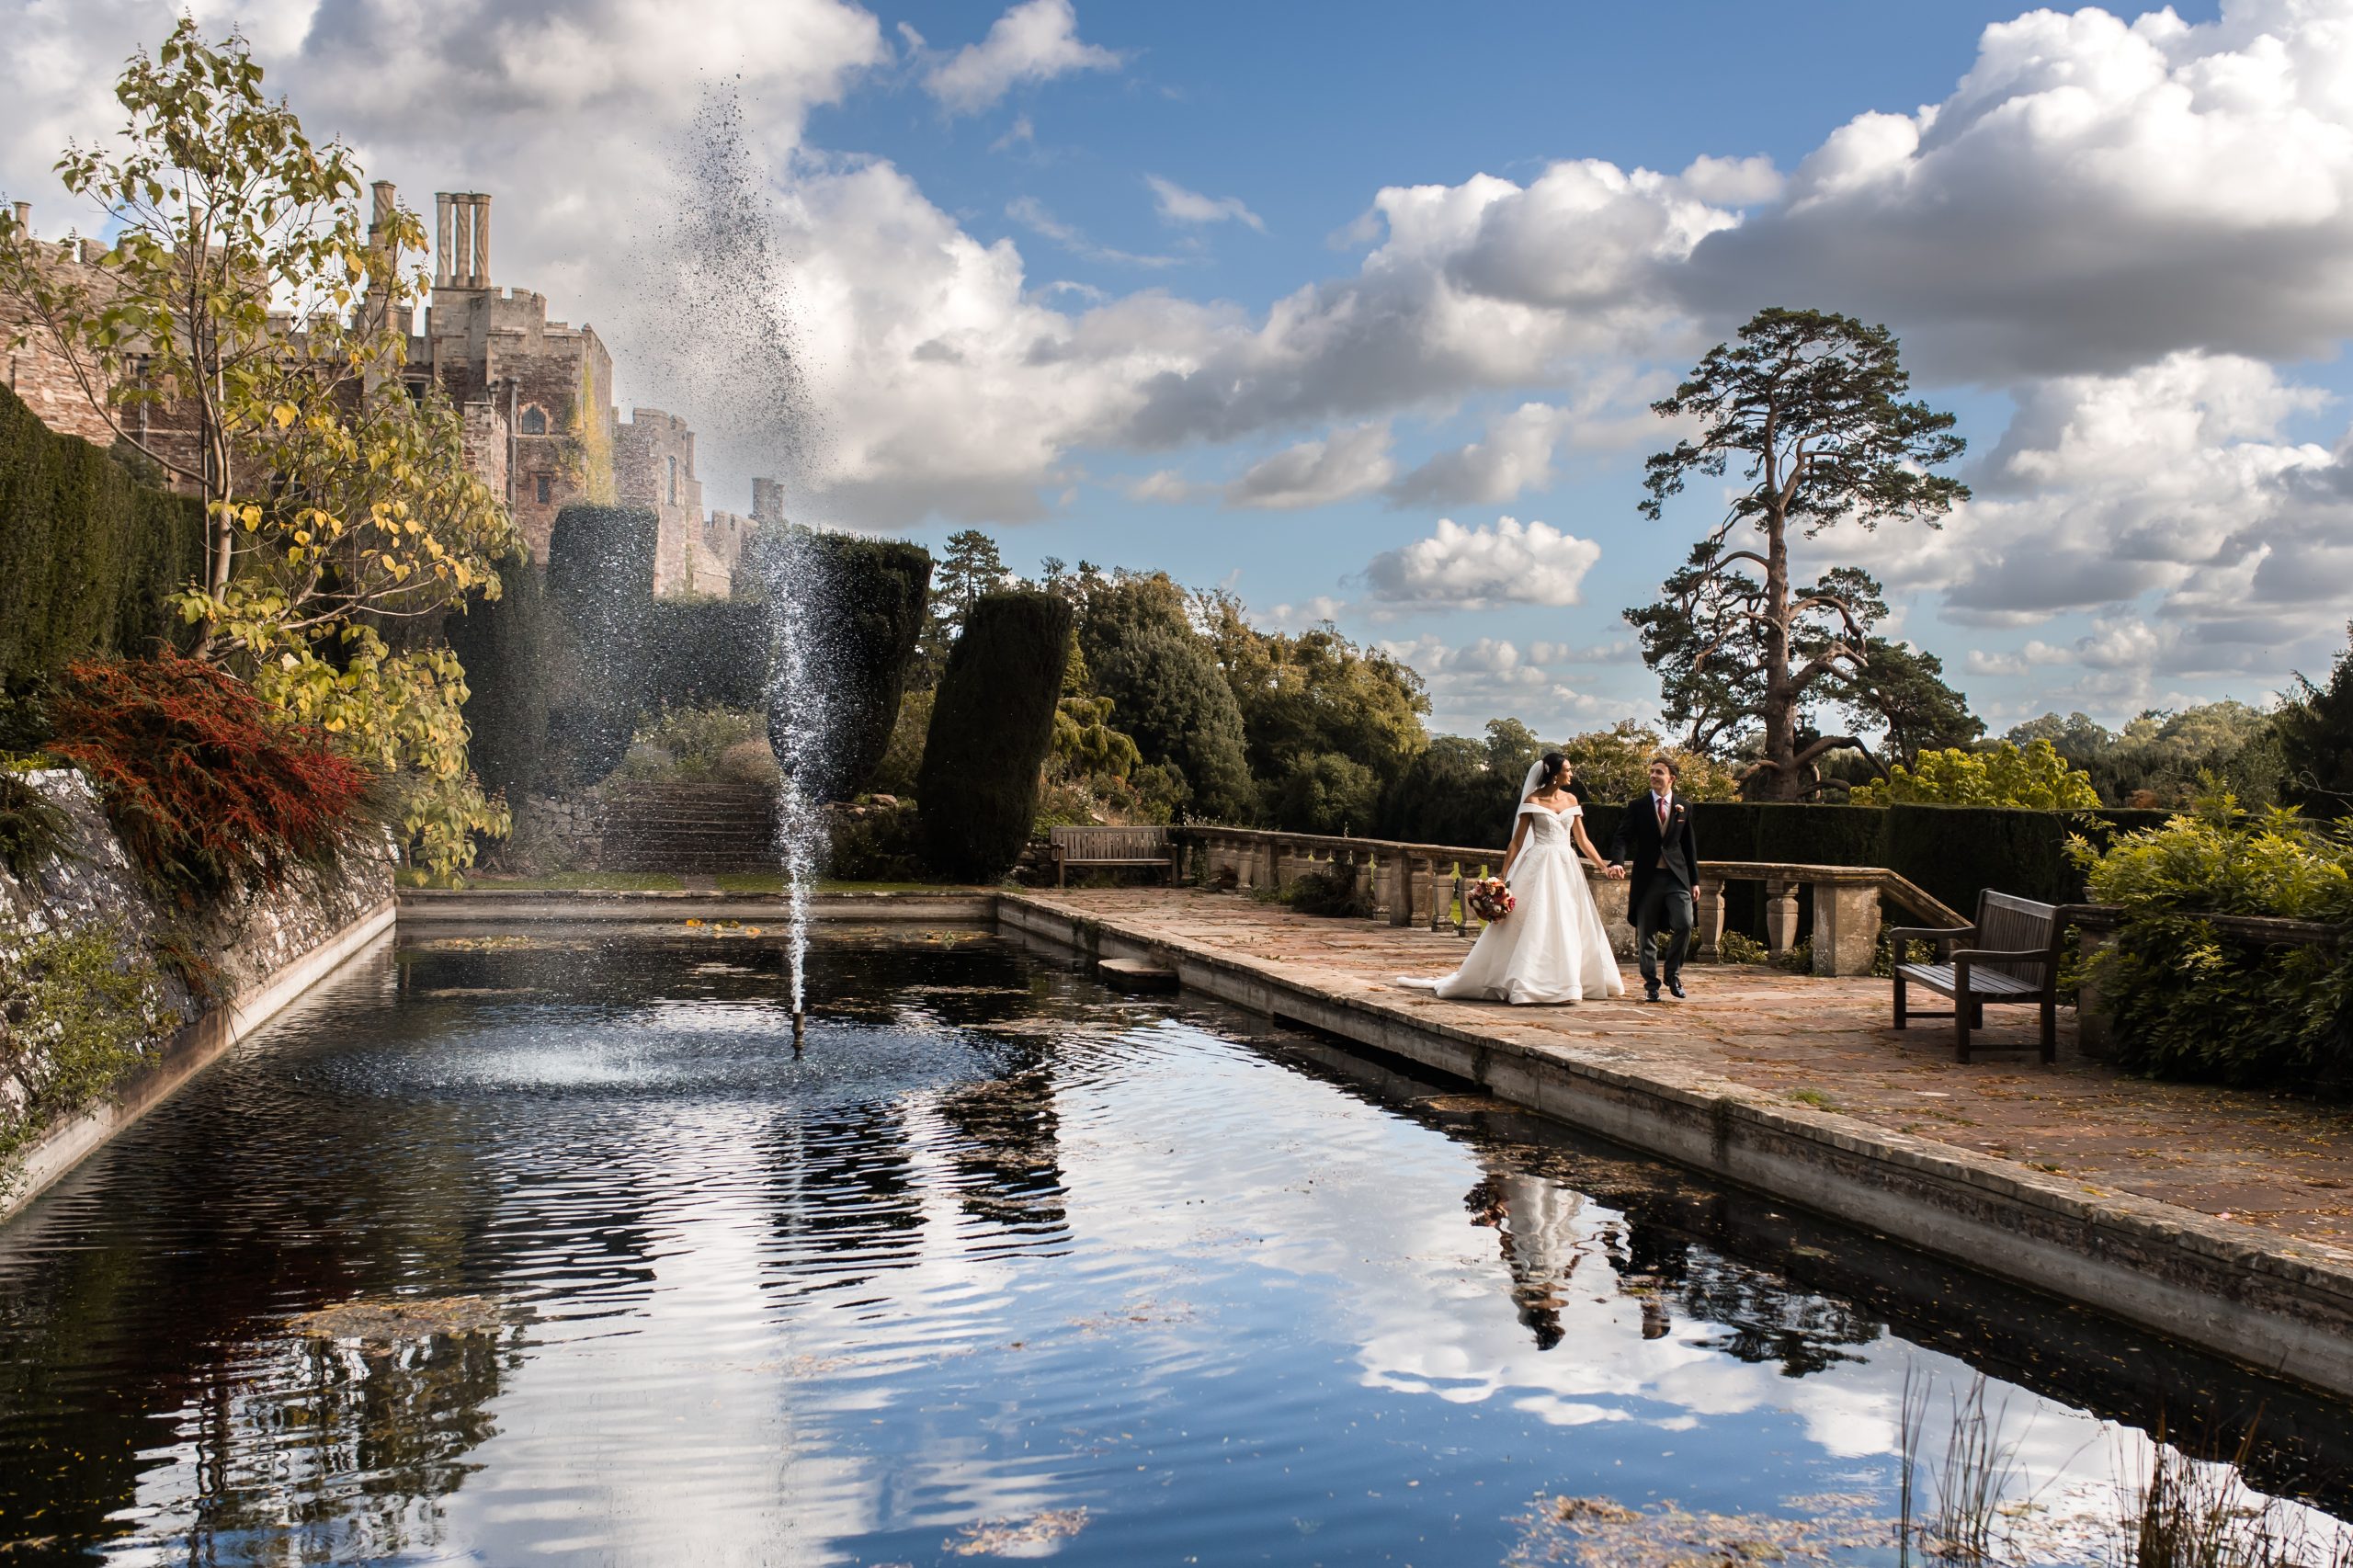 Berkeley Castle Wedding Venue...The King of the Cotwolds